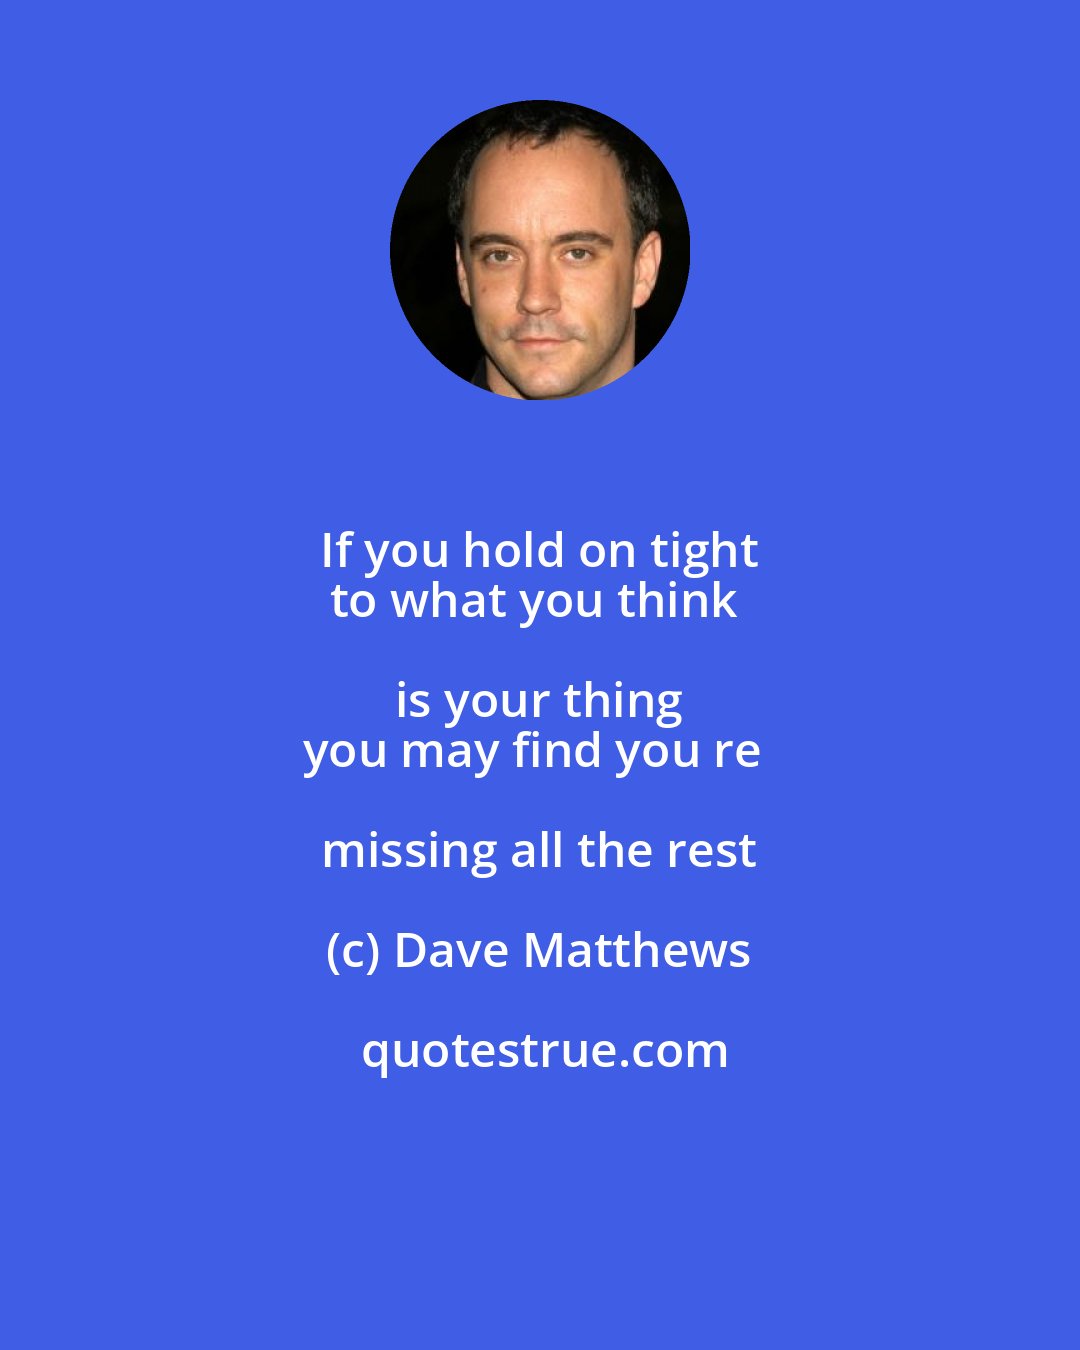 Dave Matthews: If you hold on tight 
to what you think is your thing 
you may find you re missing all the rest